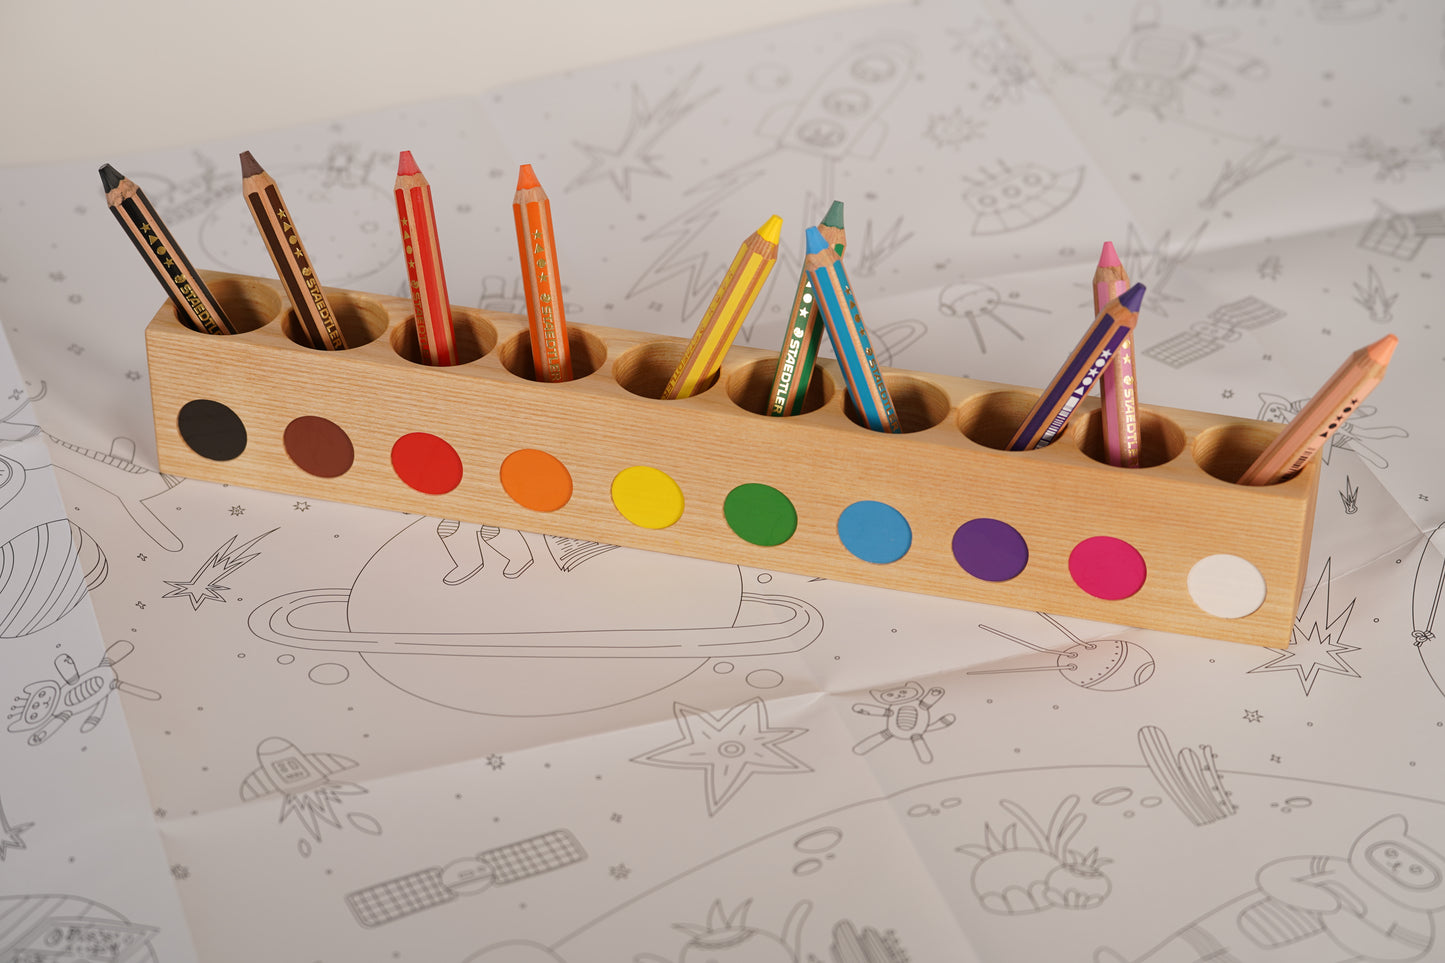 Large montessori pencil holder, with staedtler noris pencils for small kids, on top of giant coloring poster space kittens